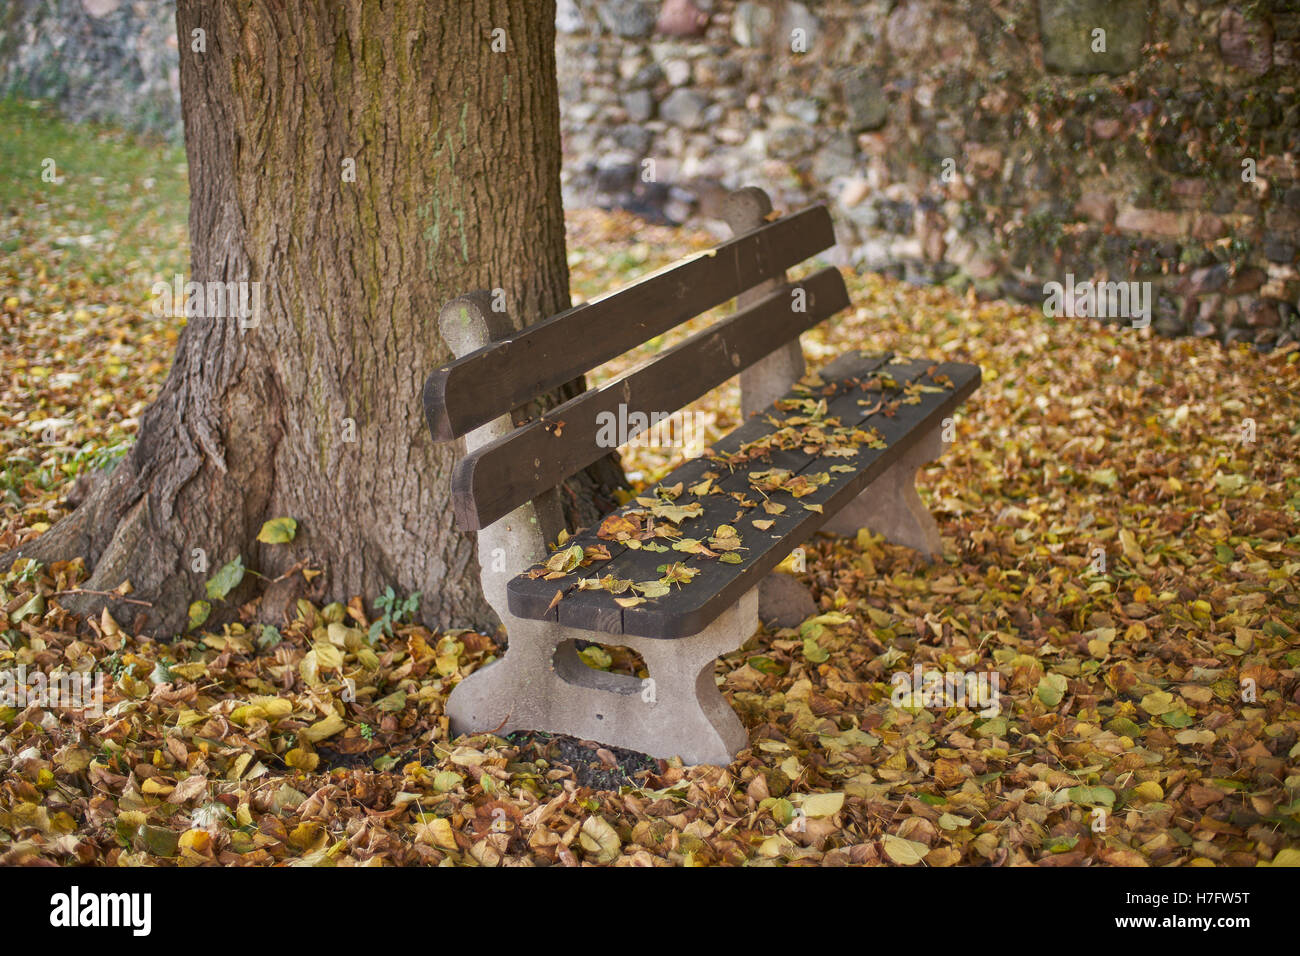 Bench based on a tree trunk among fallen autumn leaves Stock Photo